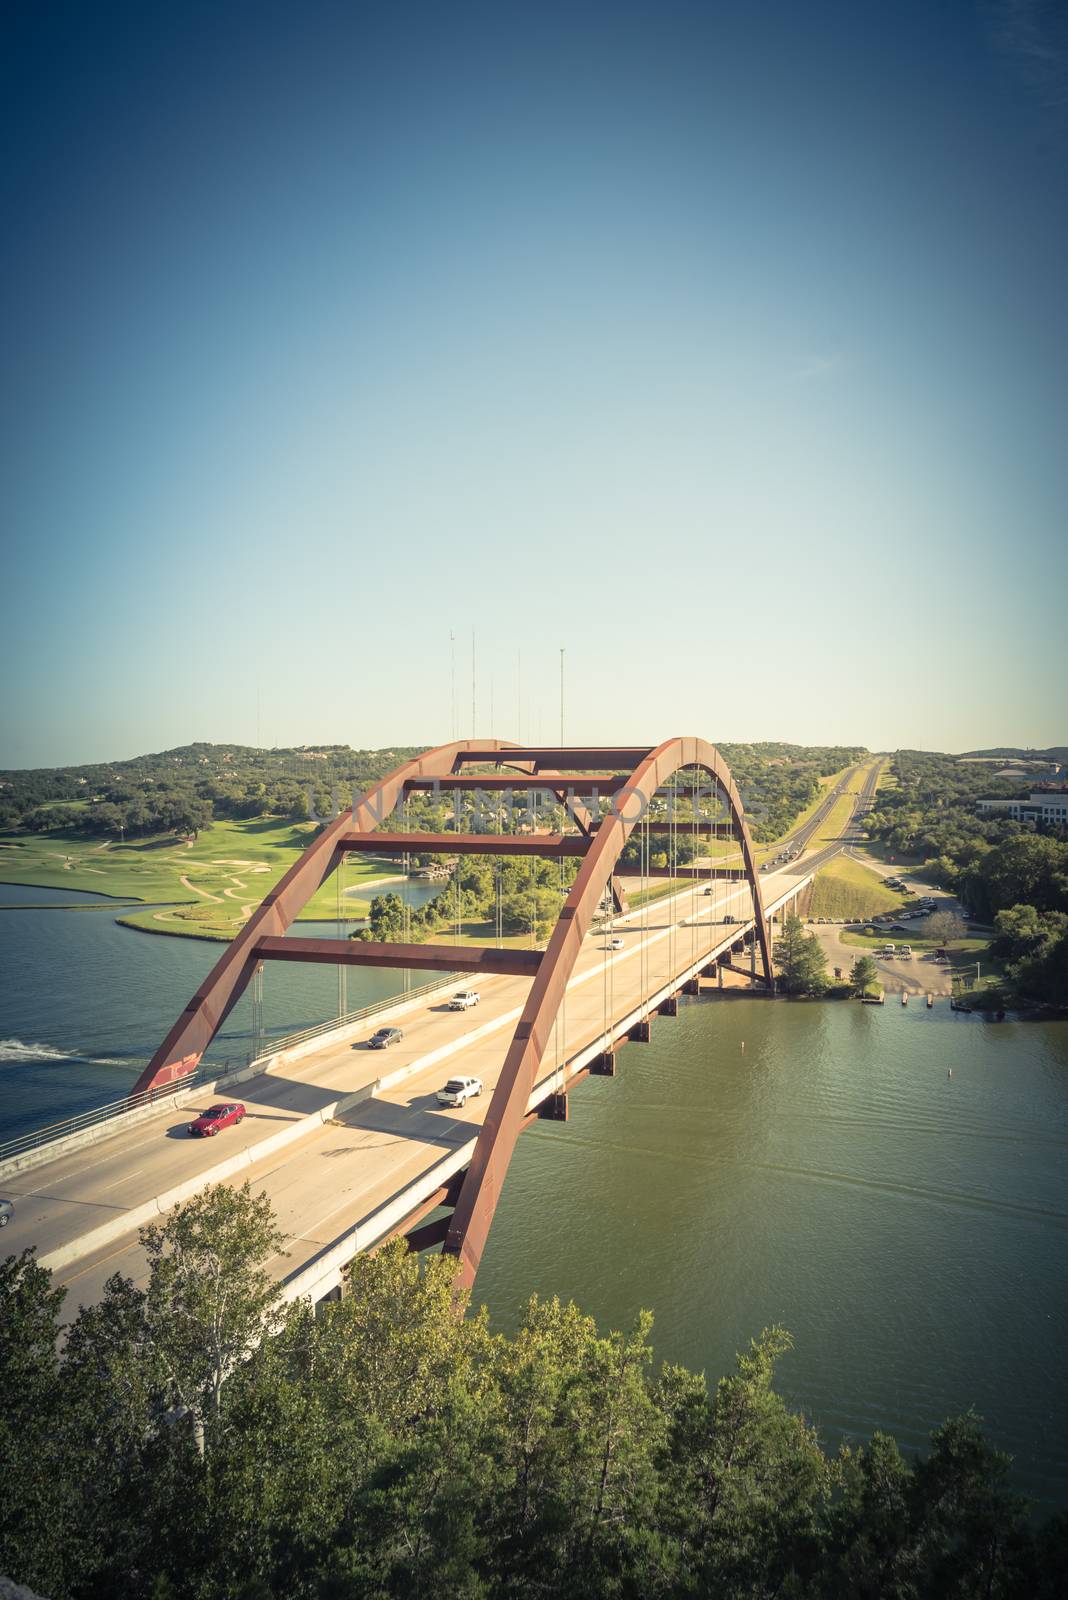 Vintage tone elevated view of Pennybacker Bridge or 360 Bridge with car traffic at daytime. A landmark in Austin, Texas, USA. Top of Town Lake, Colorado River and Hill Country green landscape